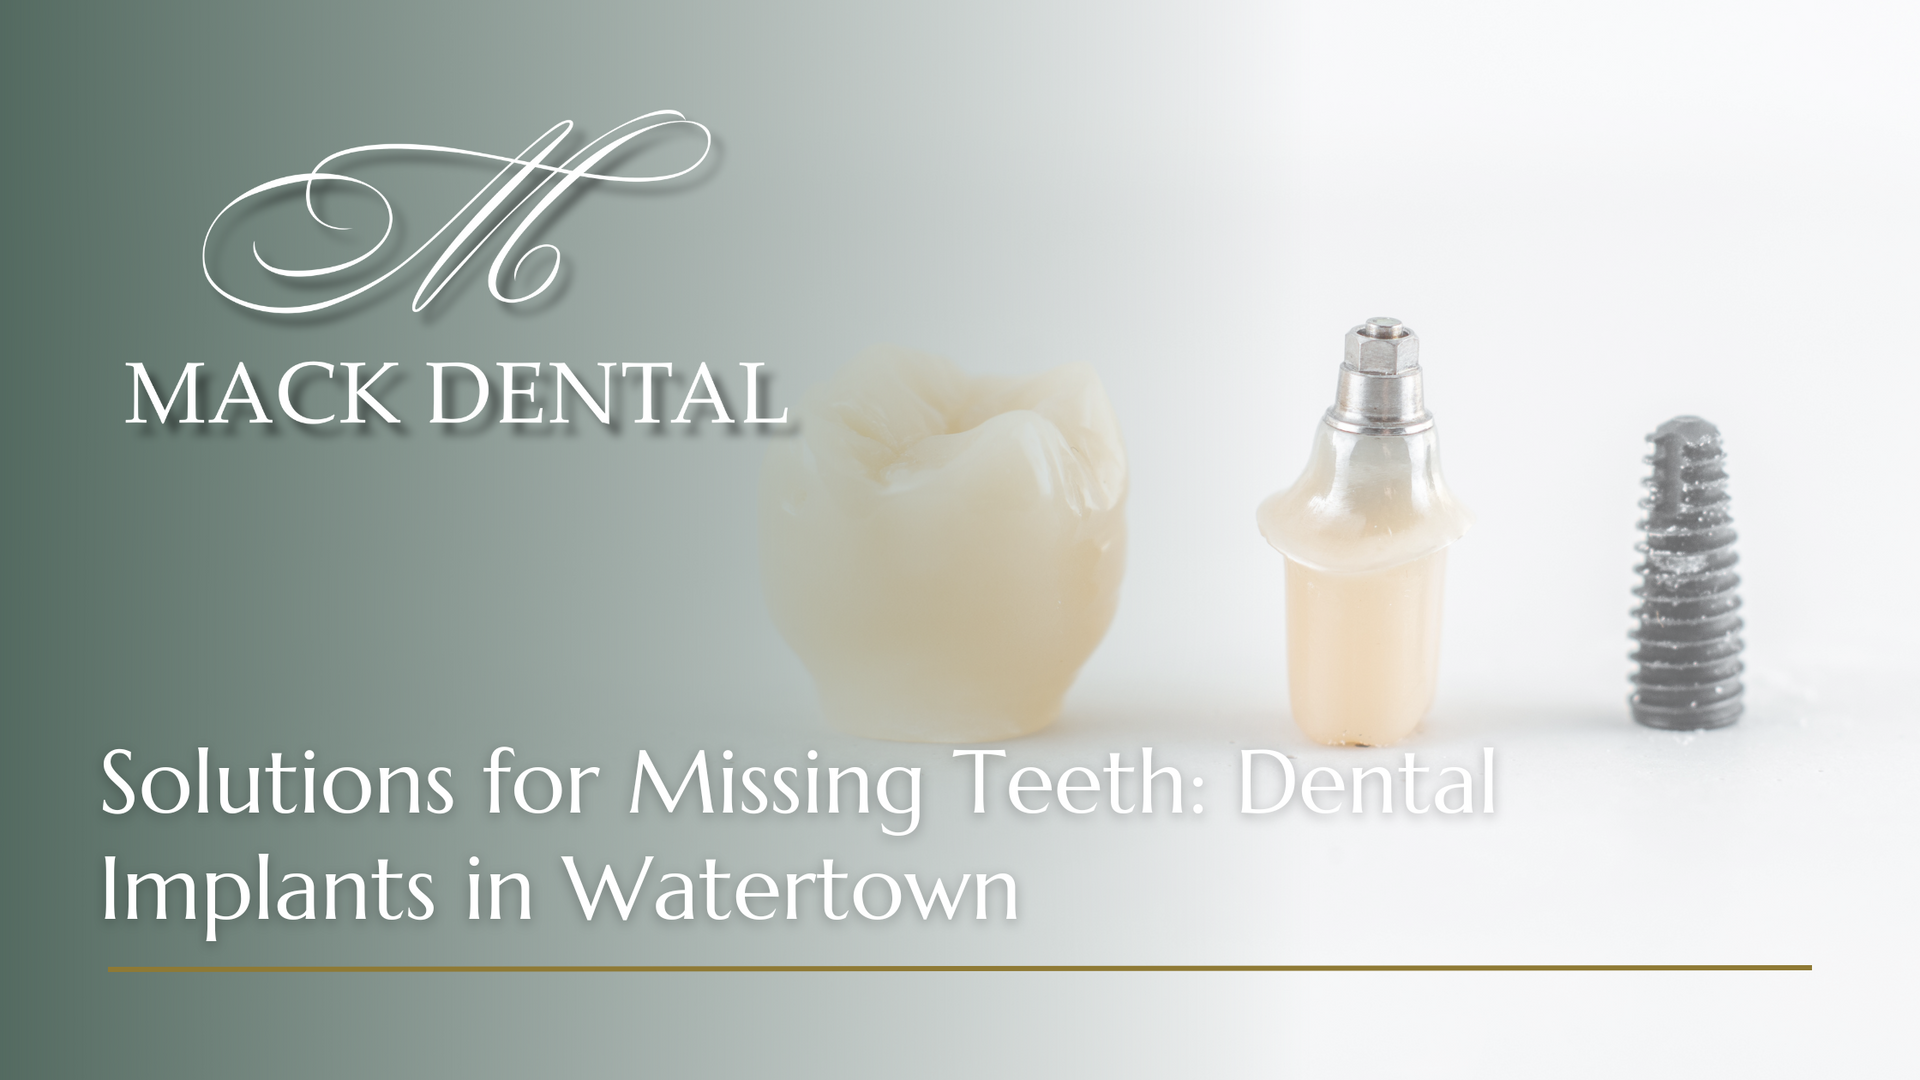 A poster for mack dental solutions for missing teeth dental implants in watertown